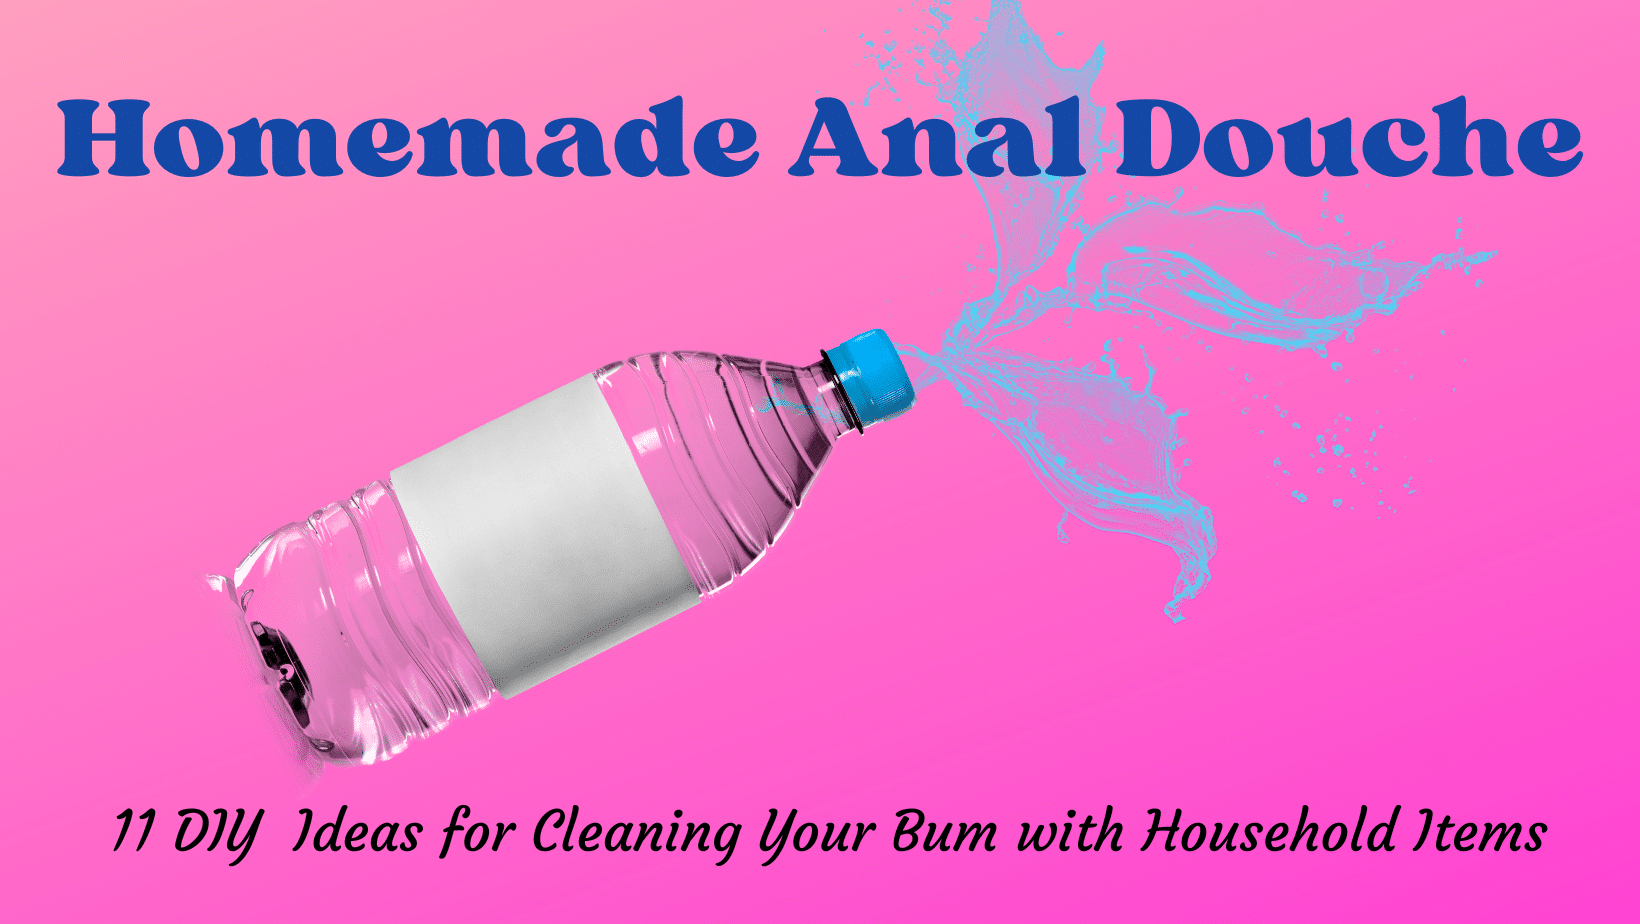 Homemade Anal Douche: 11 Ways to Clean Your Bum with Household Items